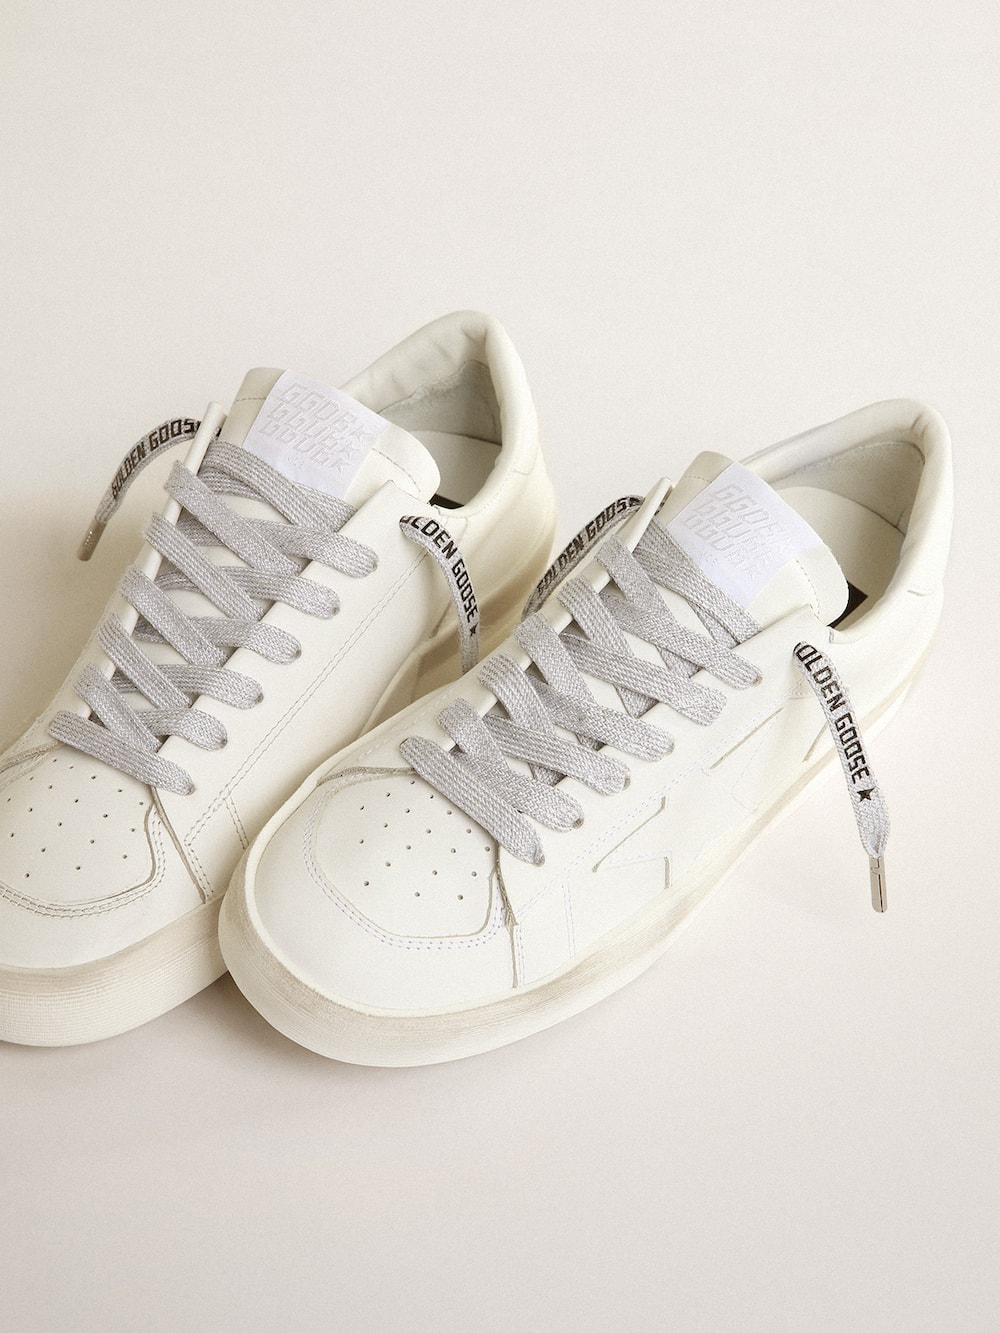 Golden Goose - Ice-colored cotton laces with contrasting black logo in 